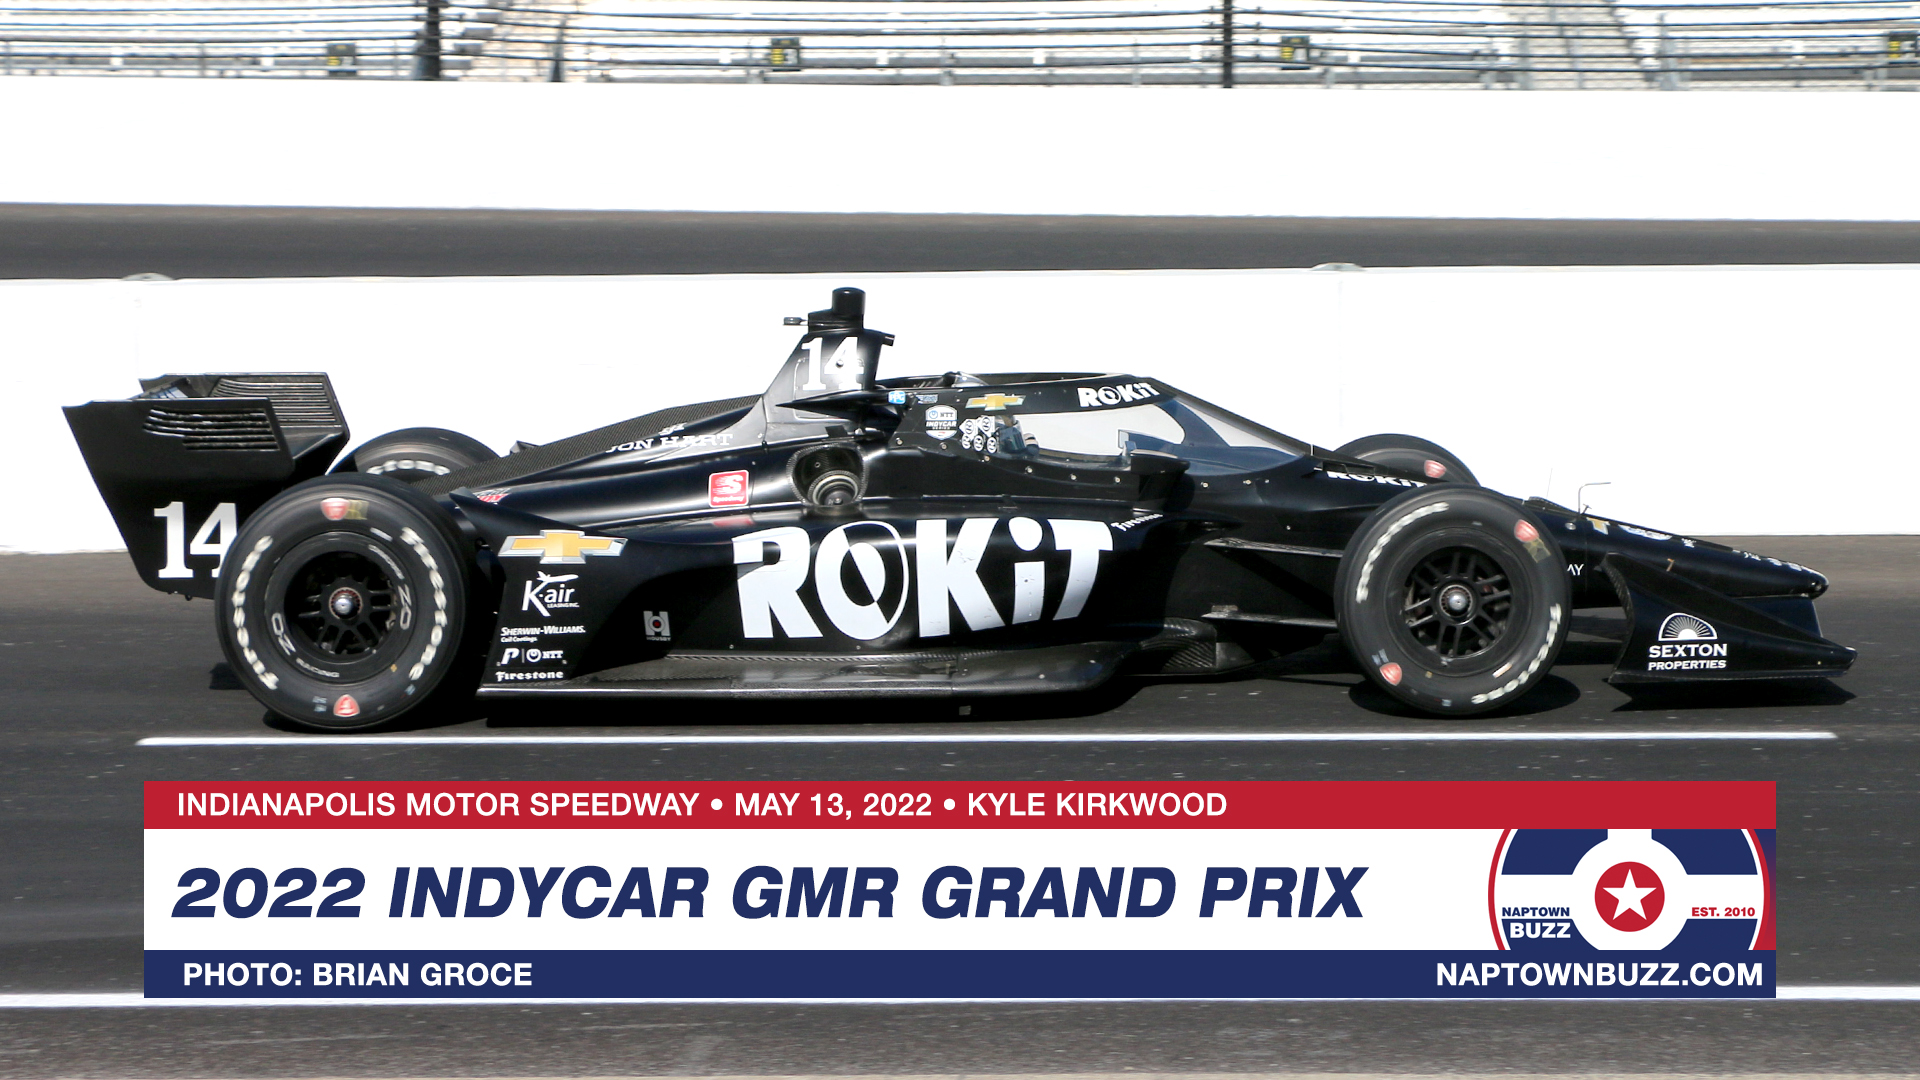 Kyle Kirkwood on May 13, 2022, at Indianapolis Motor Speedway